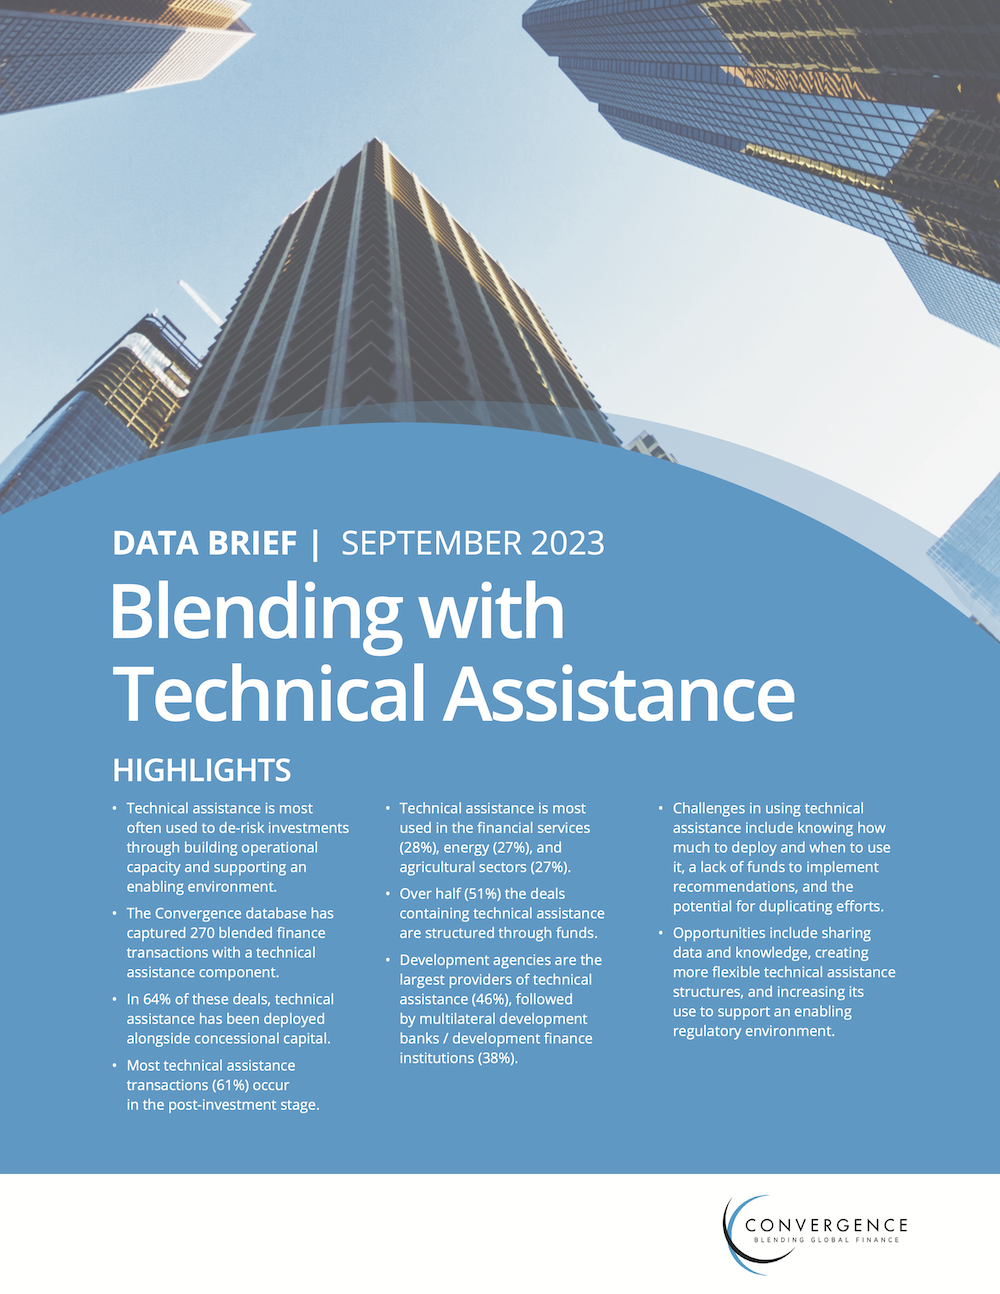 Blending with Technical Assistance